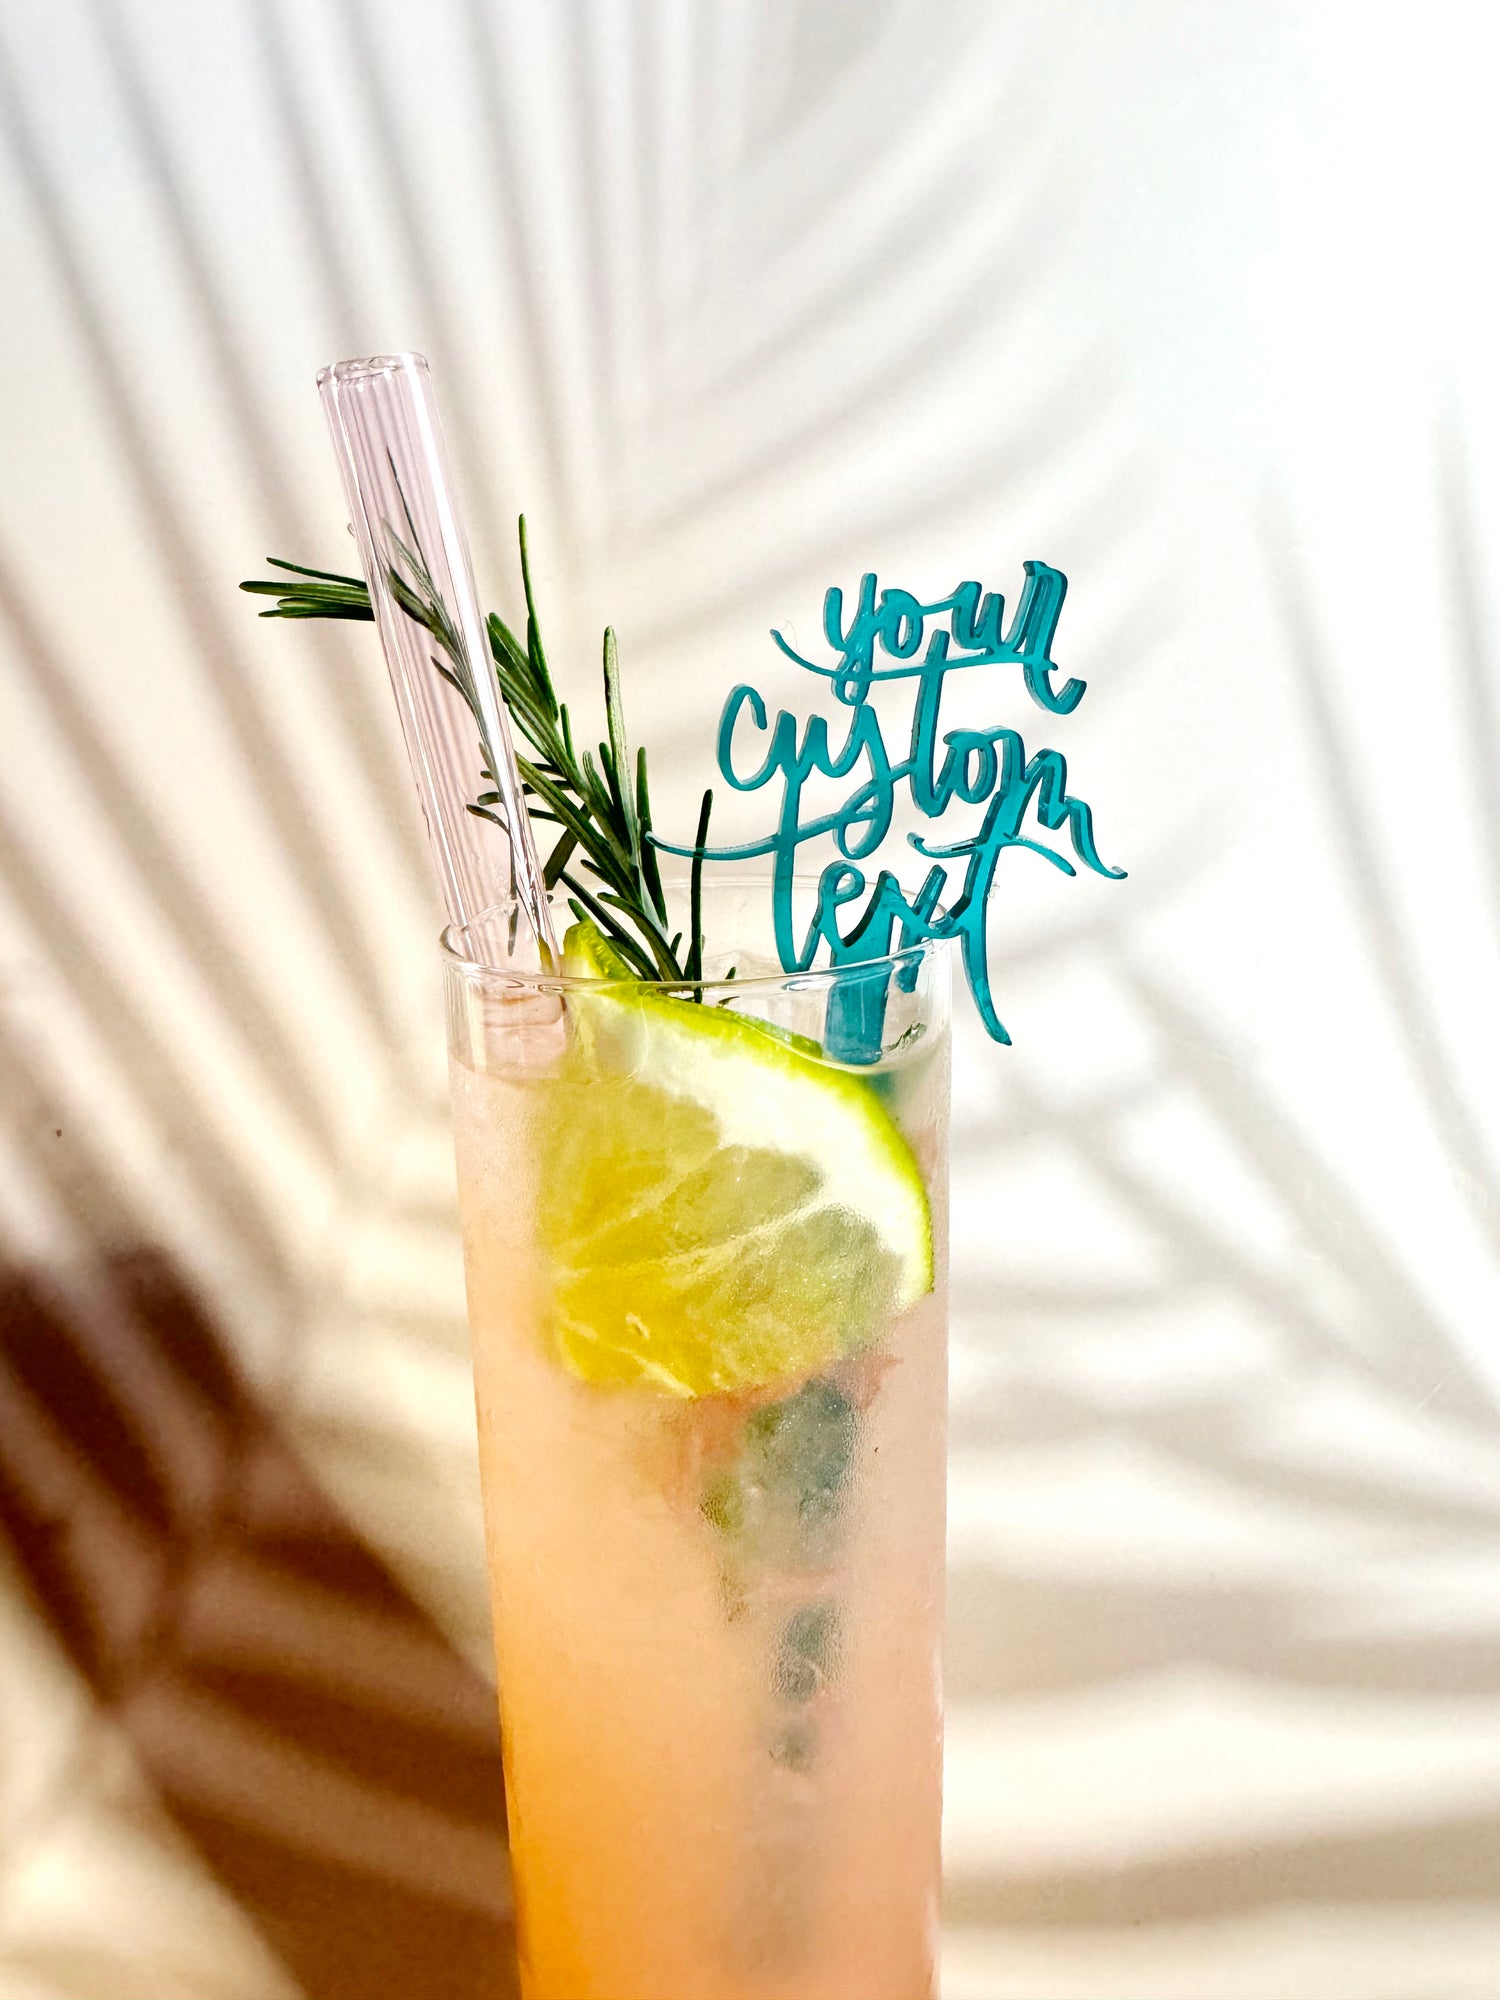 Personalized Hand-lettered Drink Swizzles